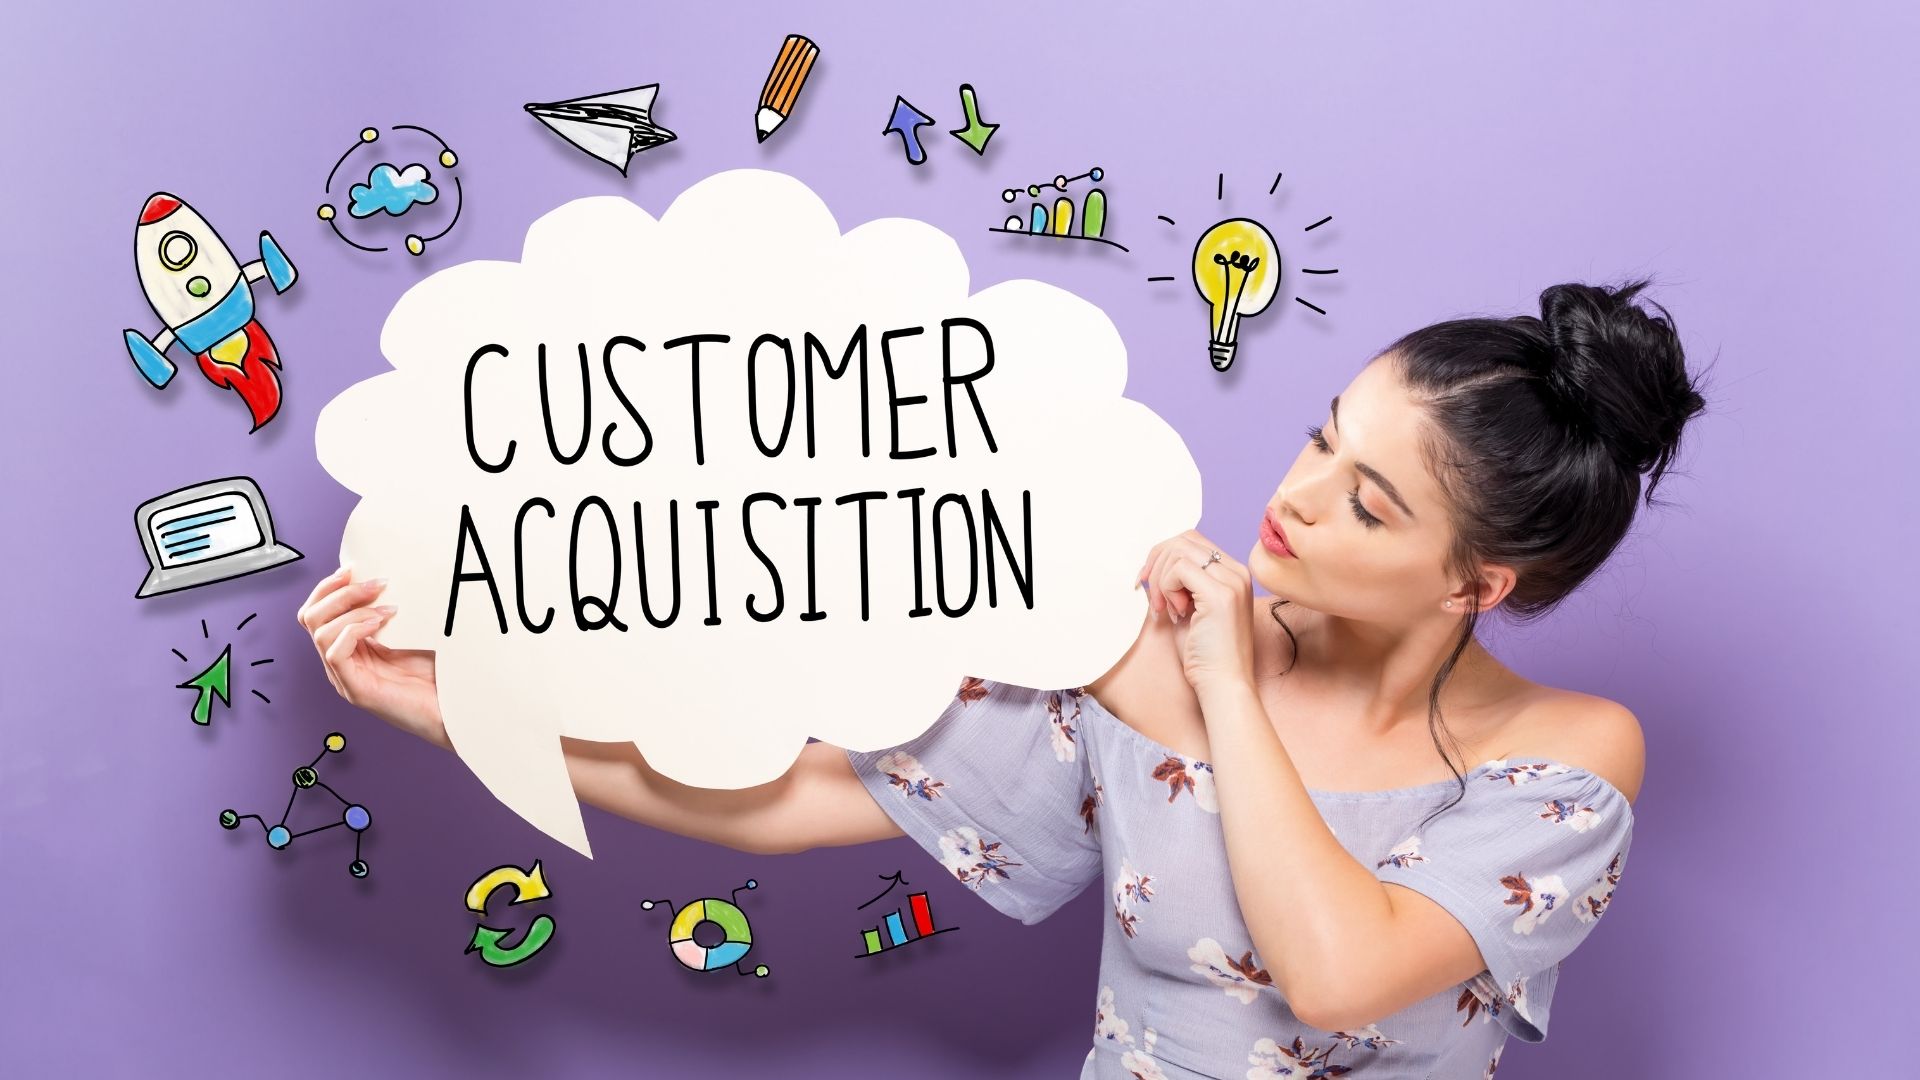 Effective Marketing Agency Customer Acquisition Strategies